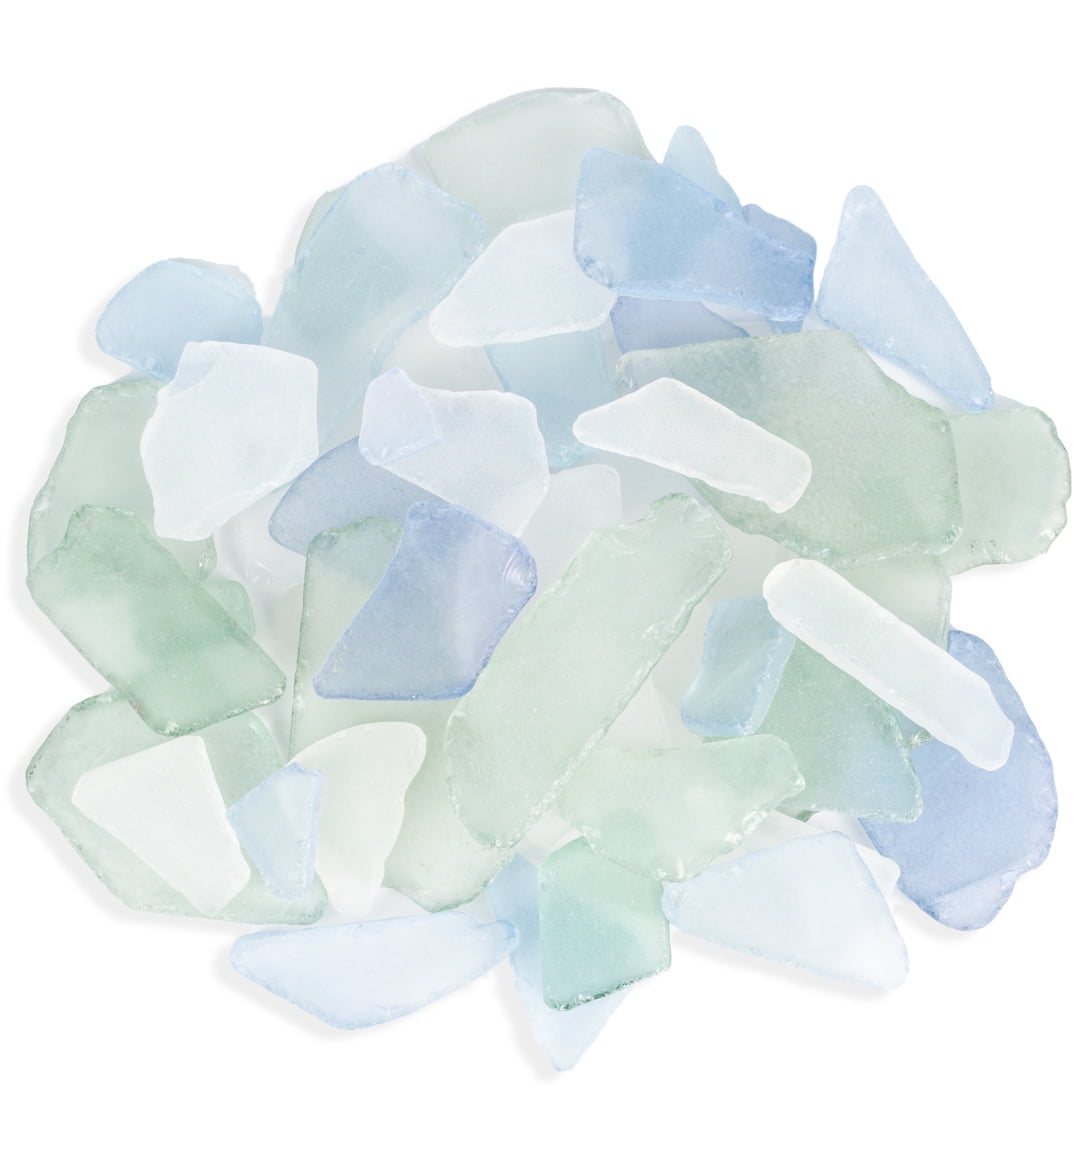 Sea Glass Caribbean Blue & Mint Green | Large Colored Sea Glass Pieces | 11  Ounces of Large Sea Glass Pieces for Decoration and Craft